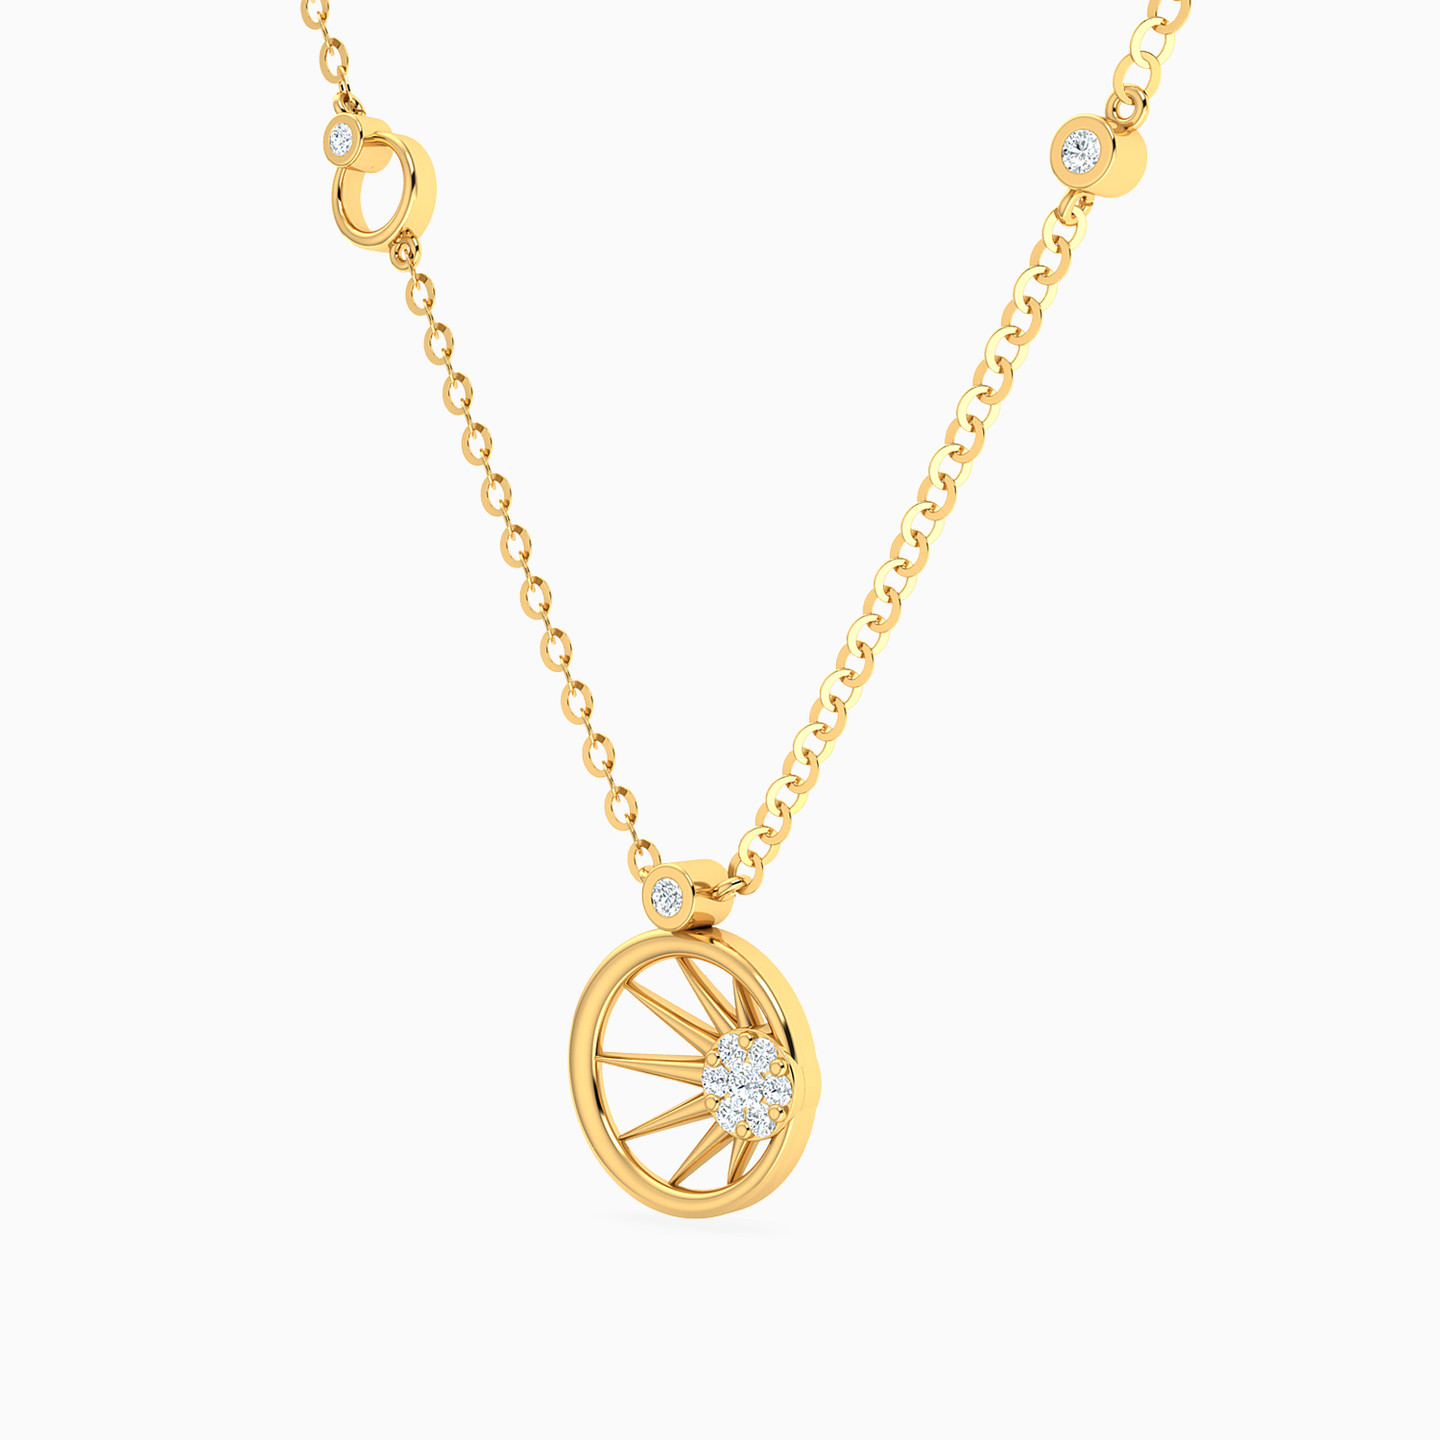 Round Shaped Diamond Pendant Necklace with 18K Gold Chain - 2